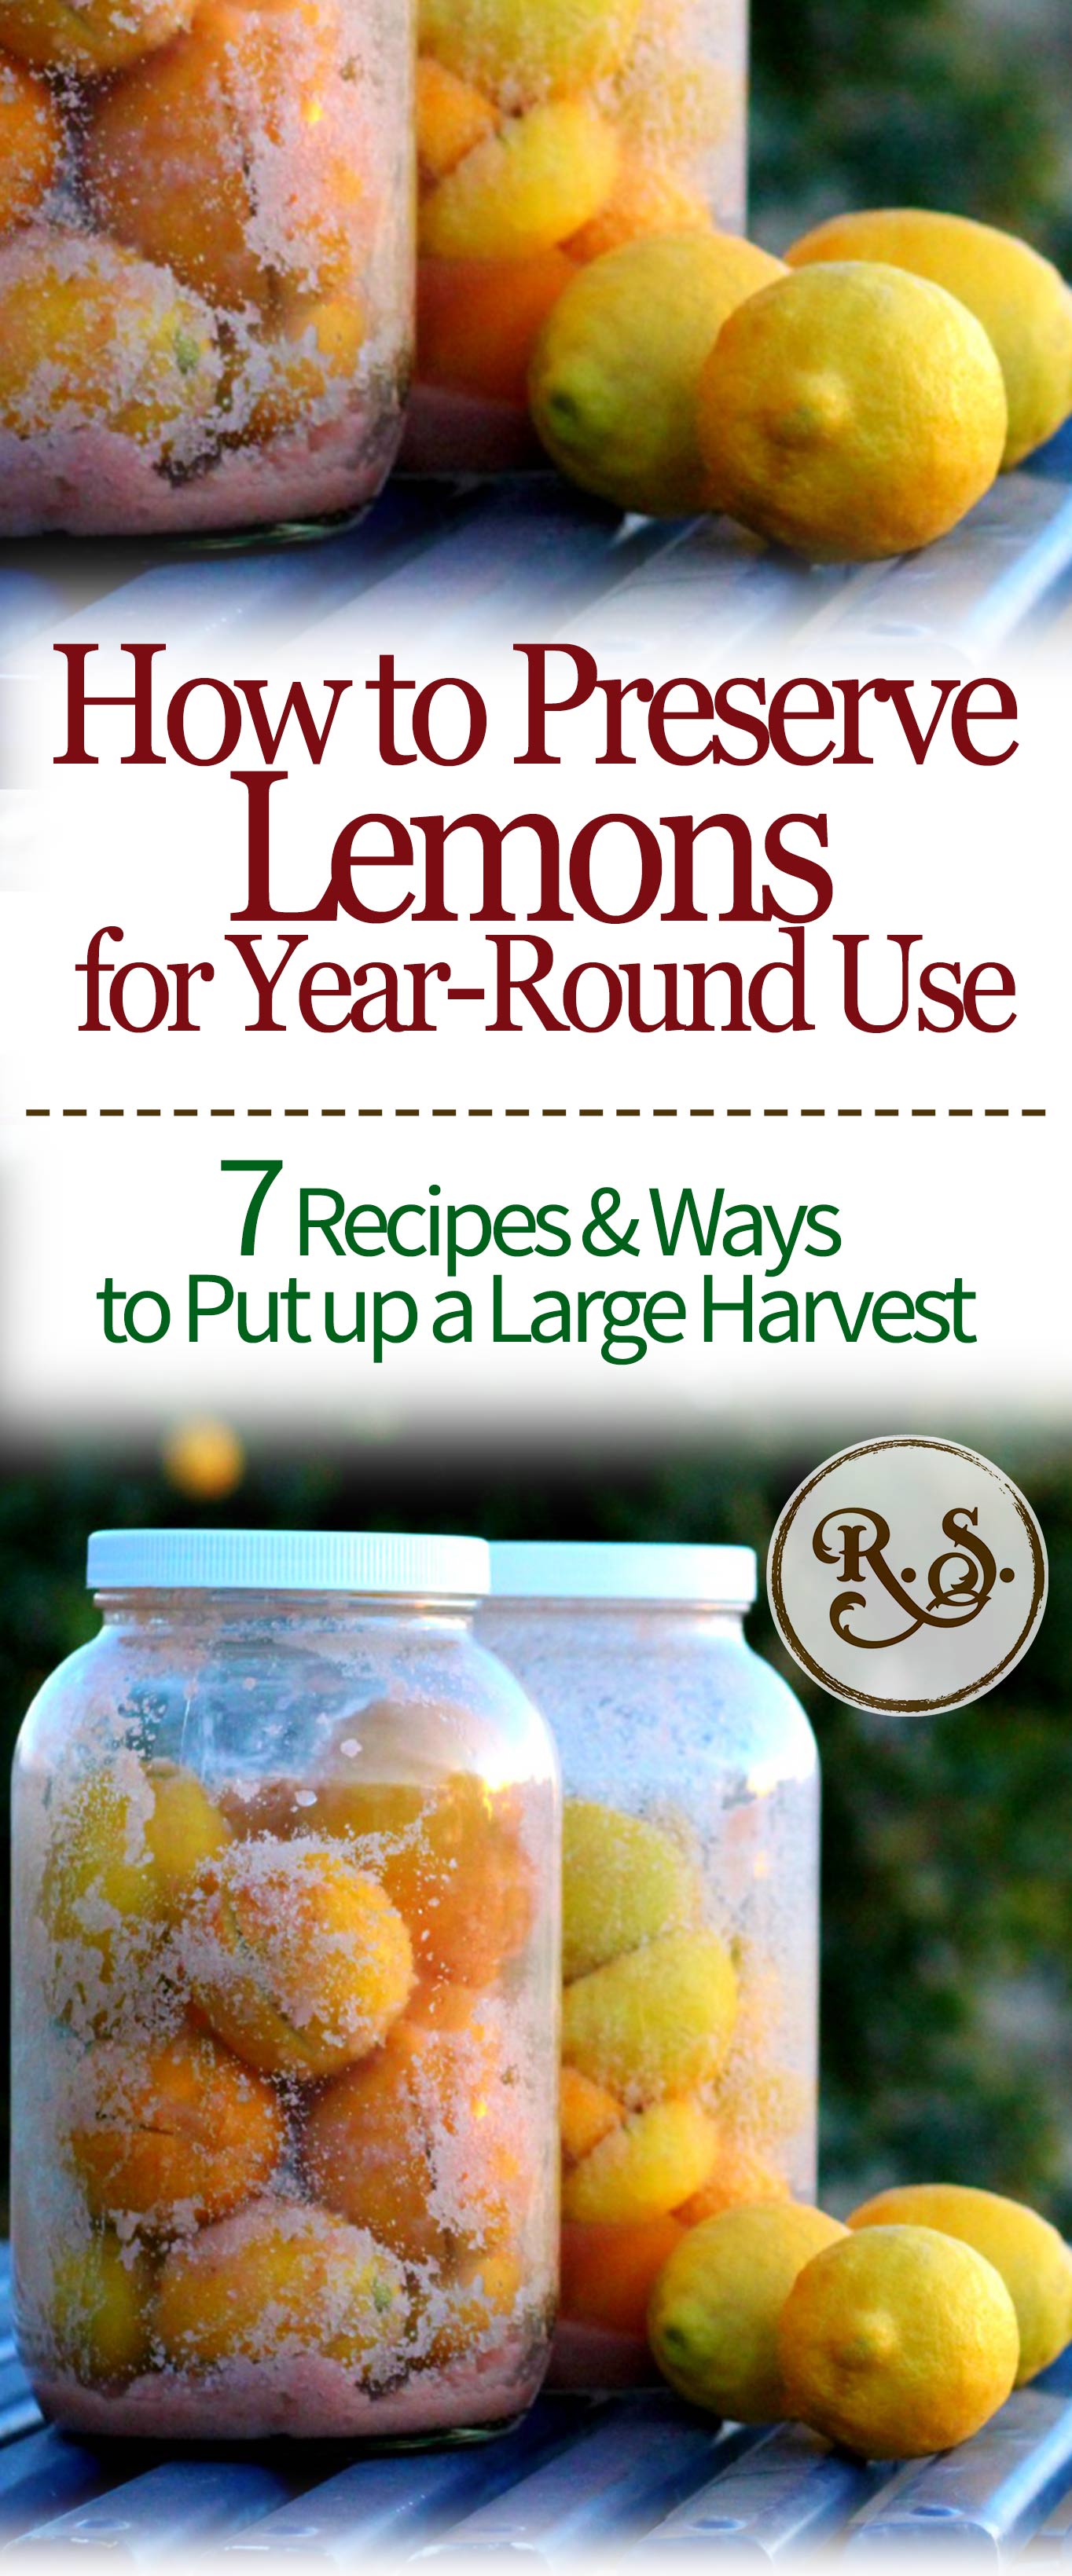 Learn how to preserve a large lemon harvest. You can ferment dehydrate, pack in salt, freeze, and more! Here are the 7 best ways and recipes I’ve found for putting up lemons for great uses later.